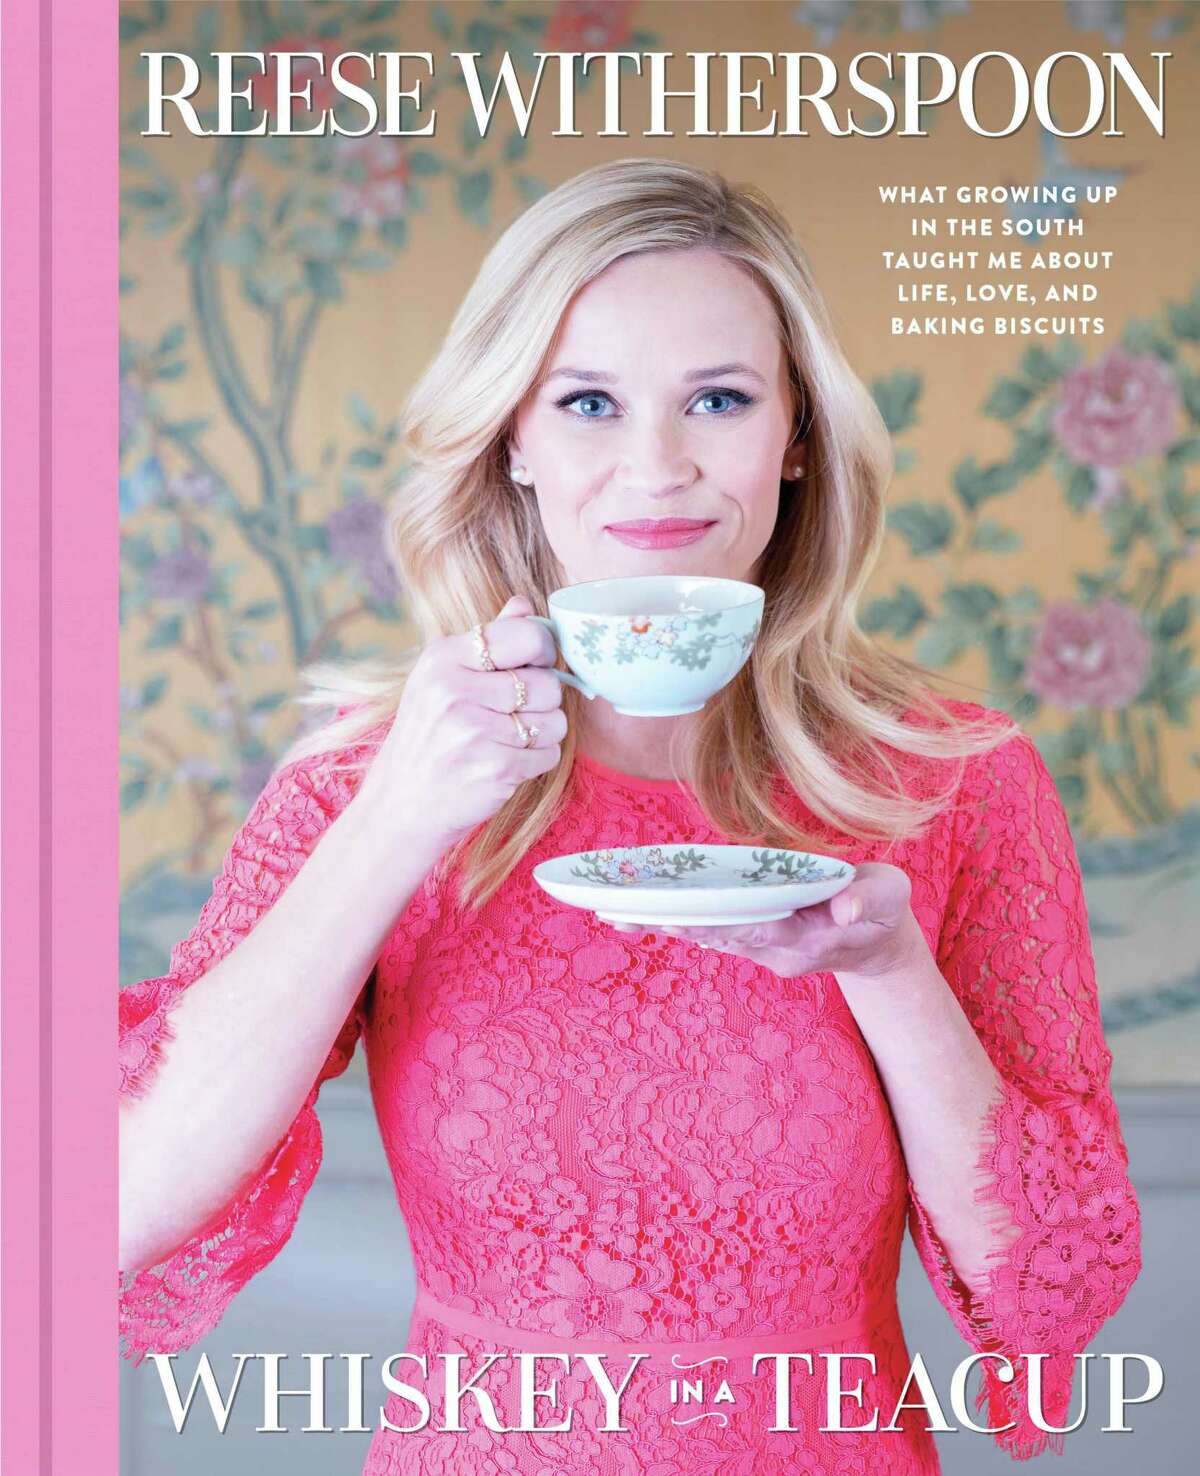 The cover of Reese Witherspoon's new book.